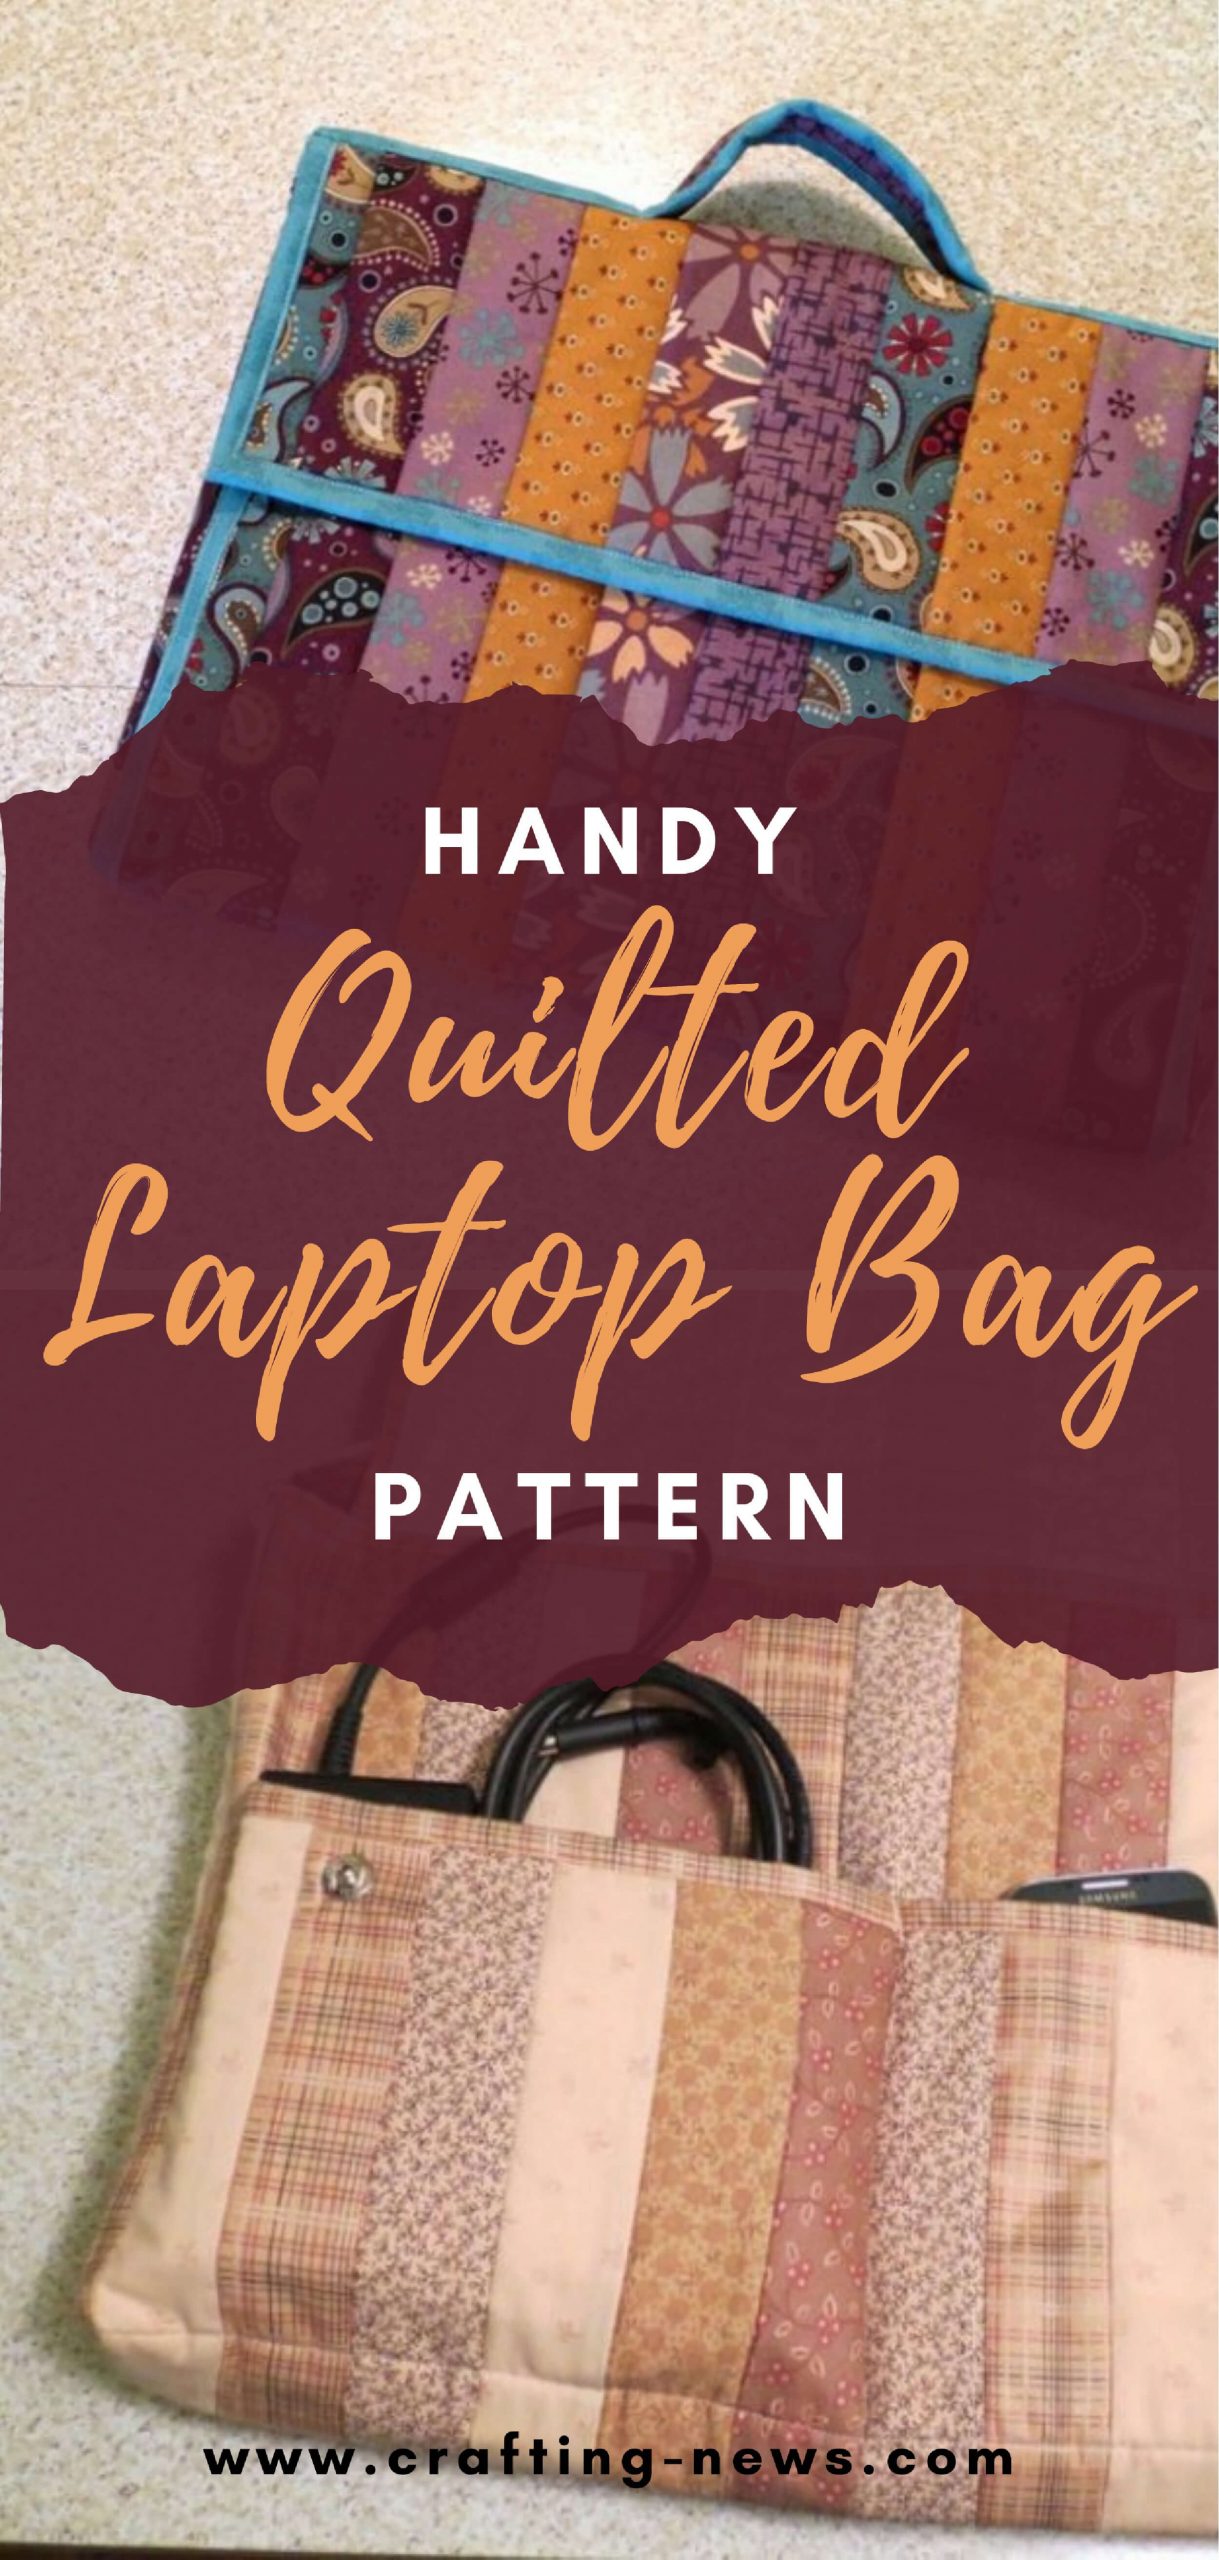 Handy Quilted Laptop Bag Pattern